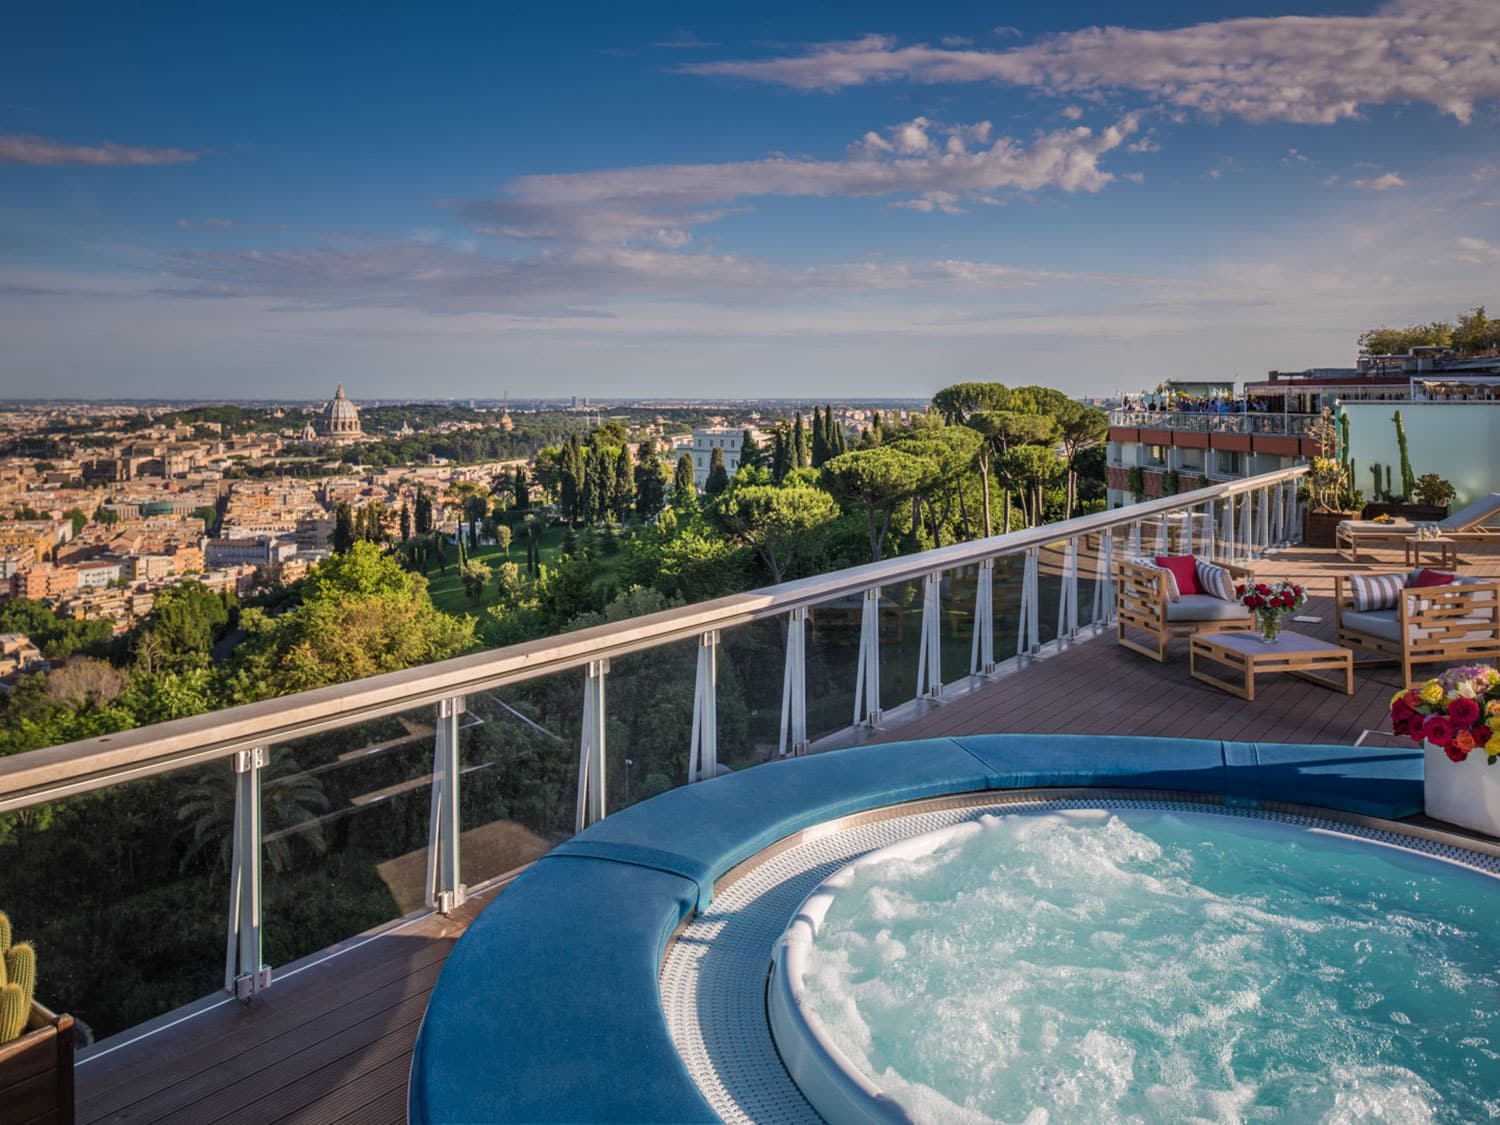 A view of Rome from a deck at Rome Cavalieri, A Waldorf Astoria Hotel, in Italy.